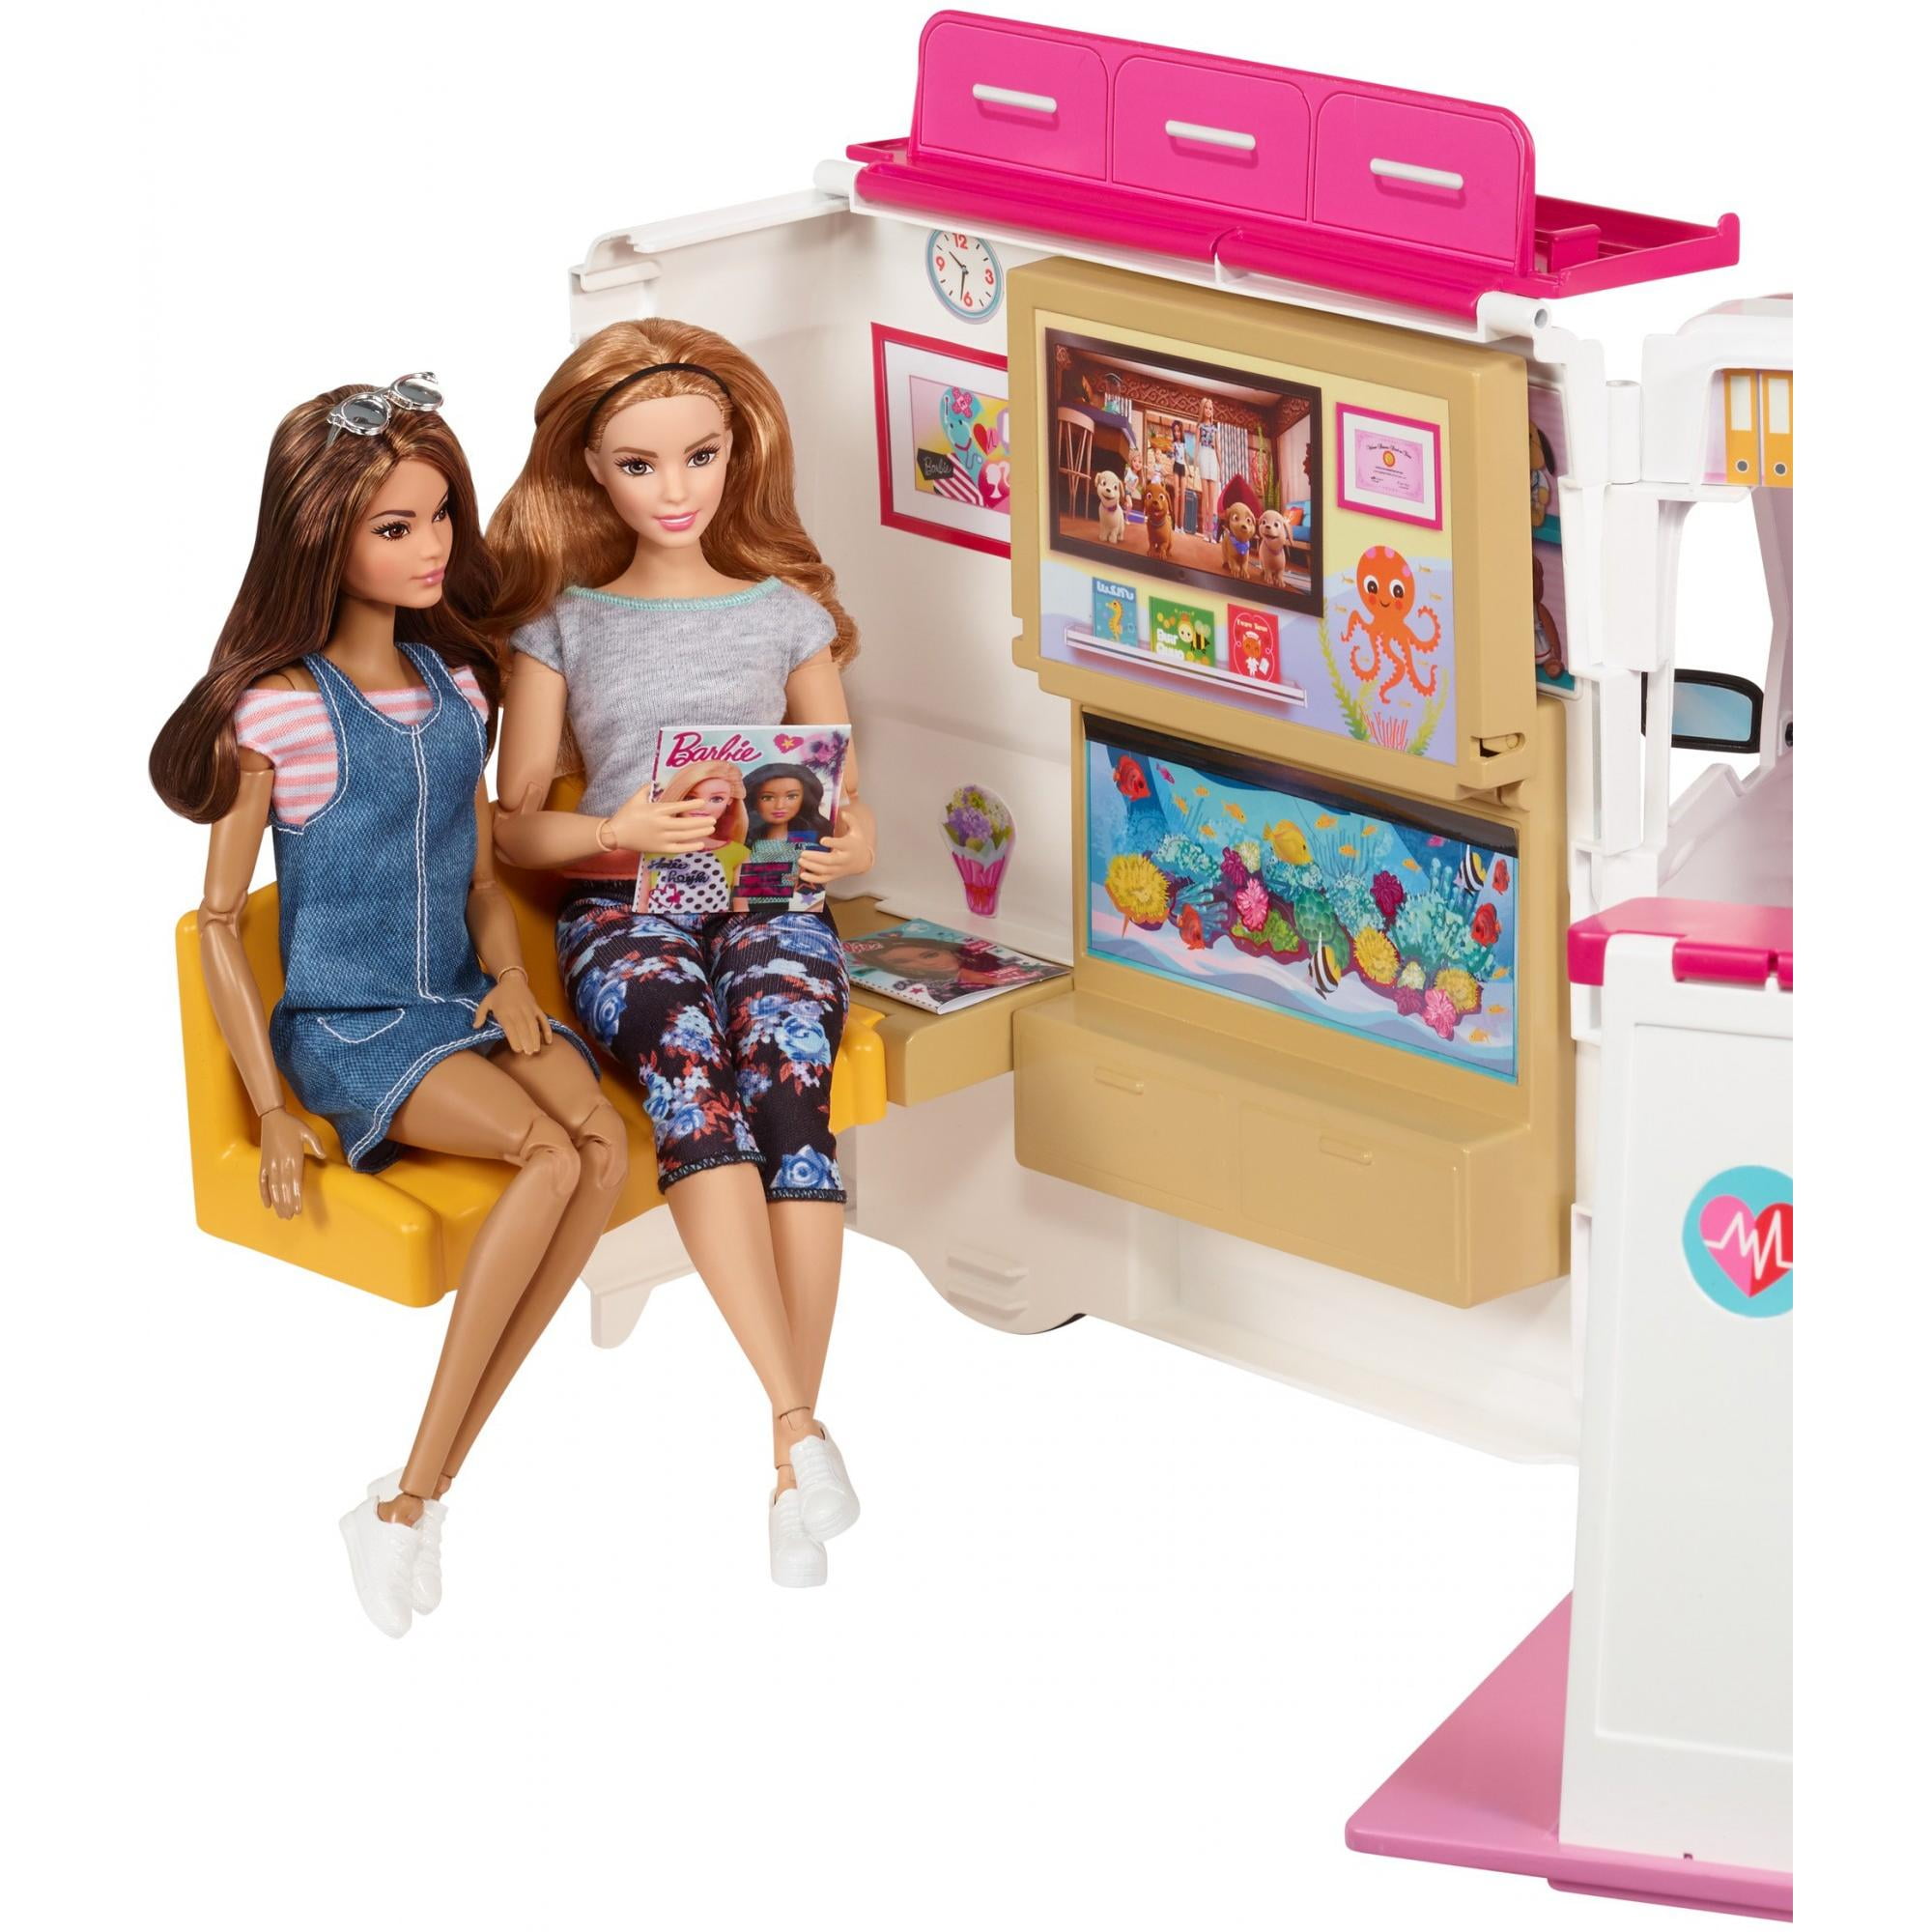 Barbie Care Clinic 2-in-1 Fun Playset for Ages 3Y+